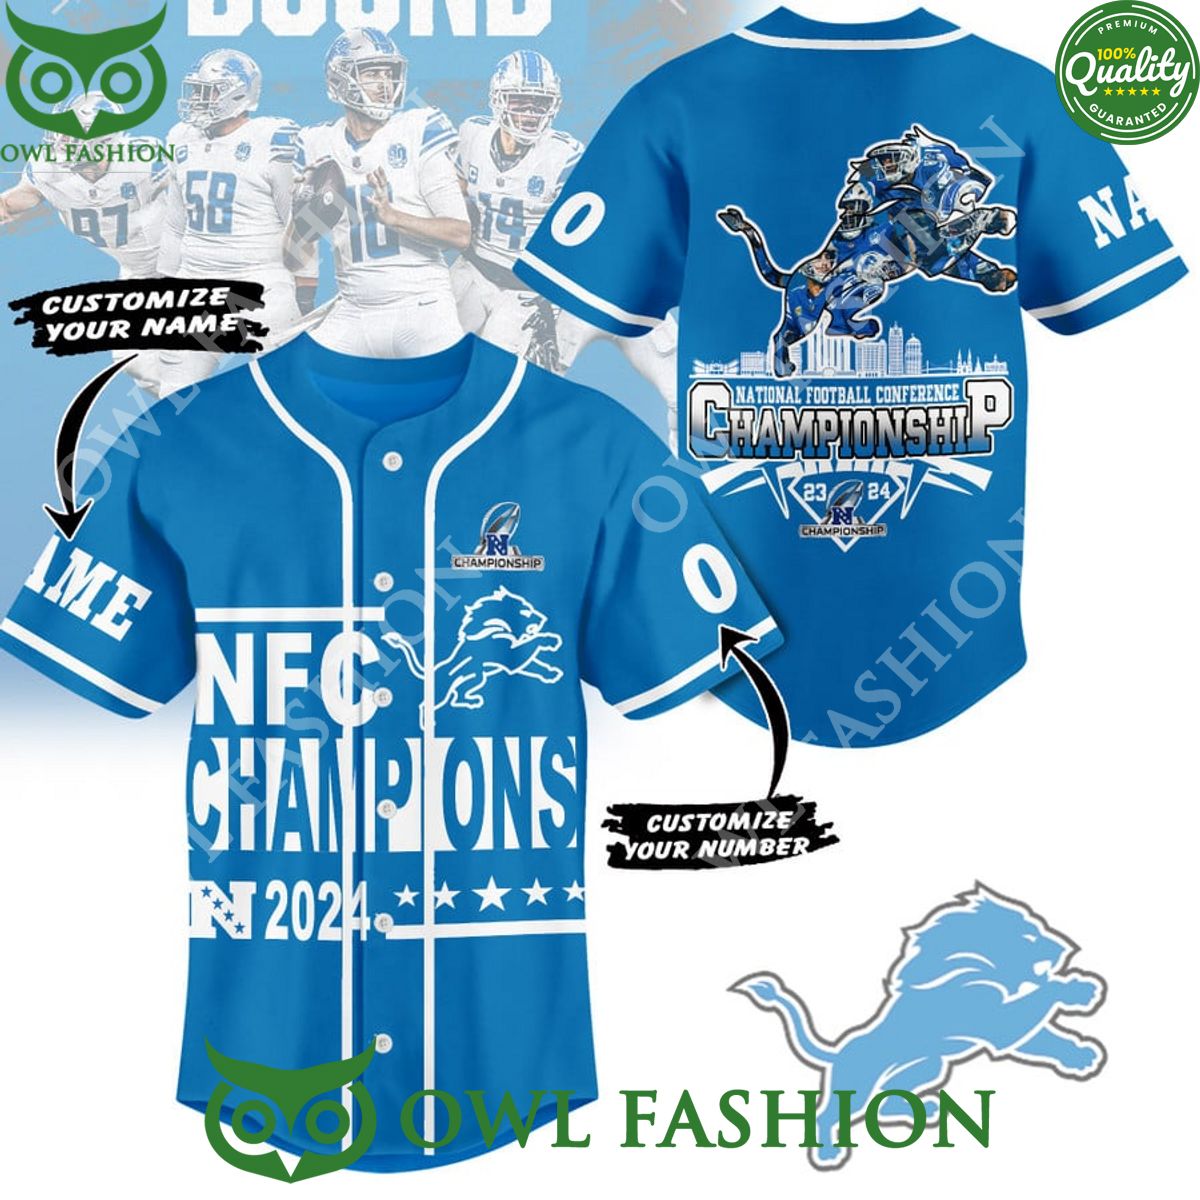 NFC Champions 2024 Detroit Lions Football Conference Custom Name Number baseball jersey